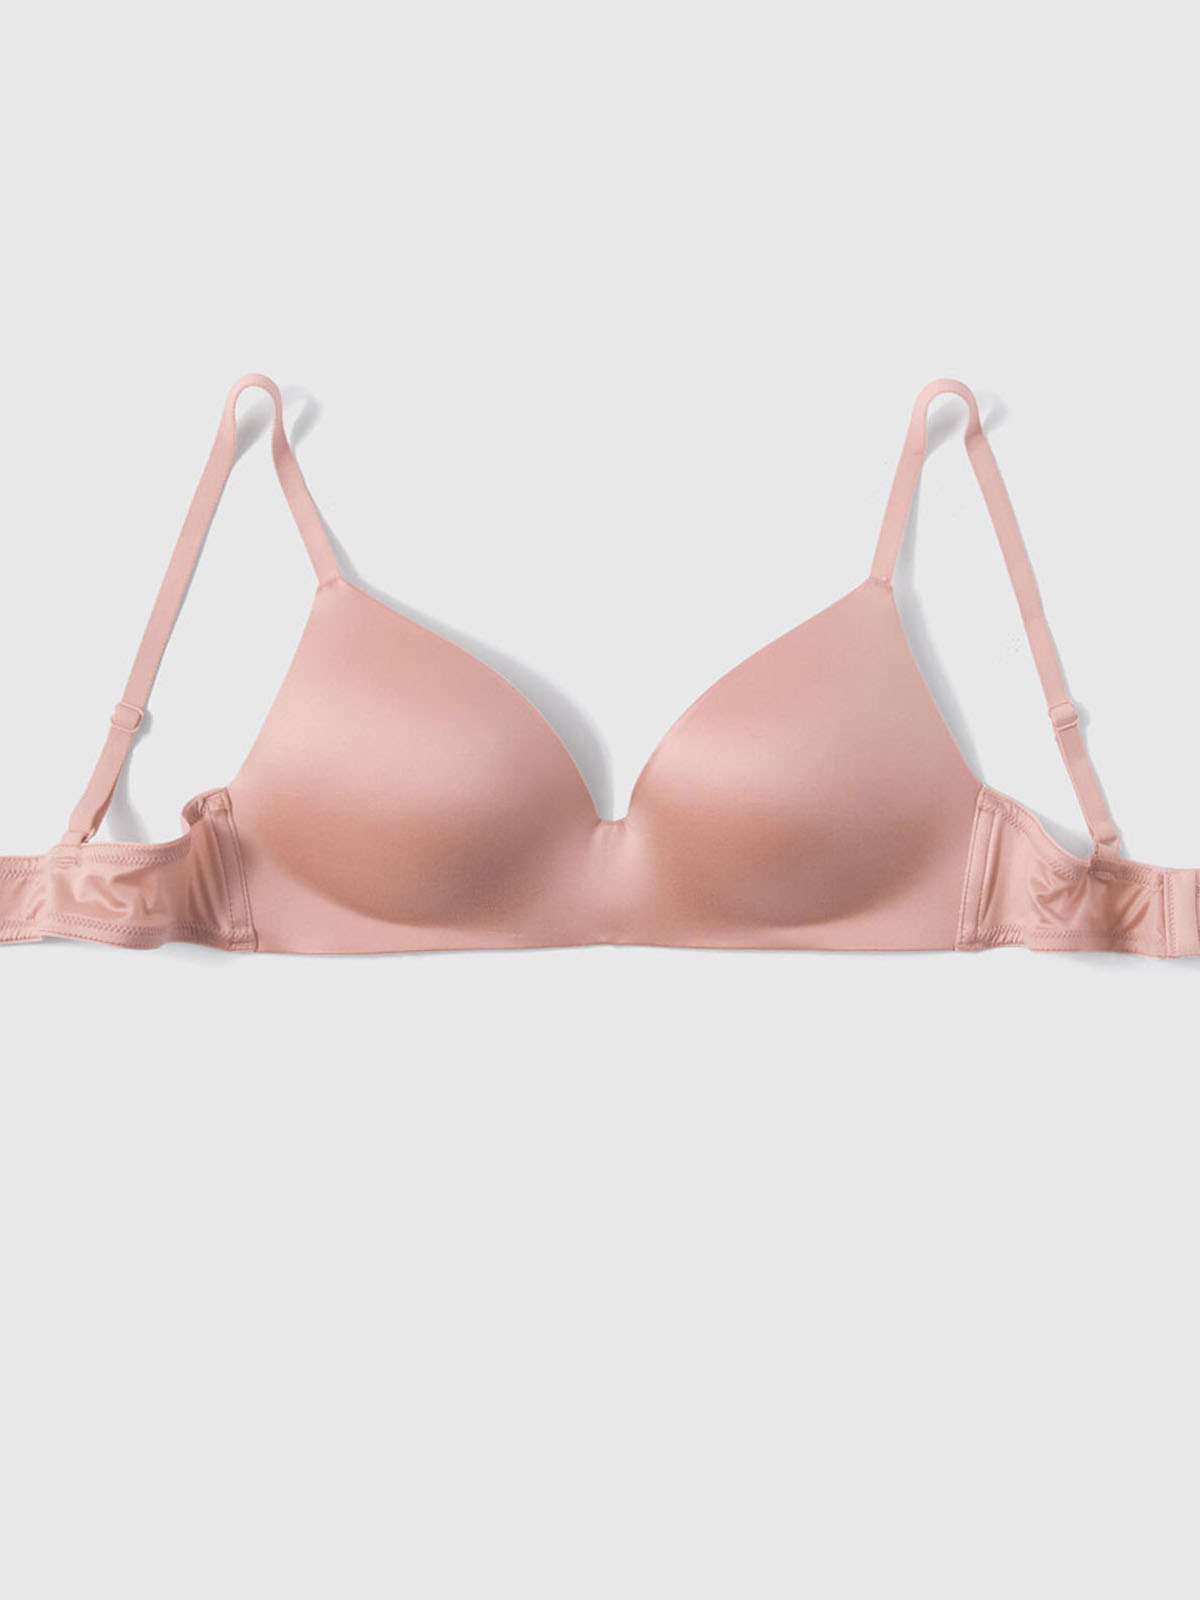 La Senza Push Up B - Get Best Price from Manufacturers & Suppliers in India